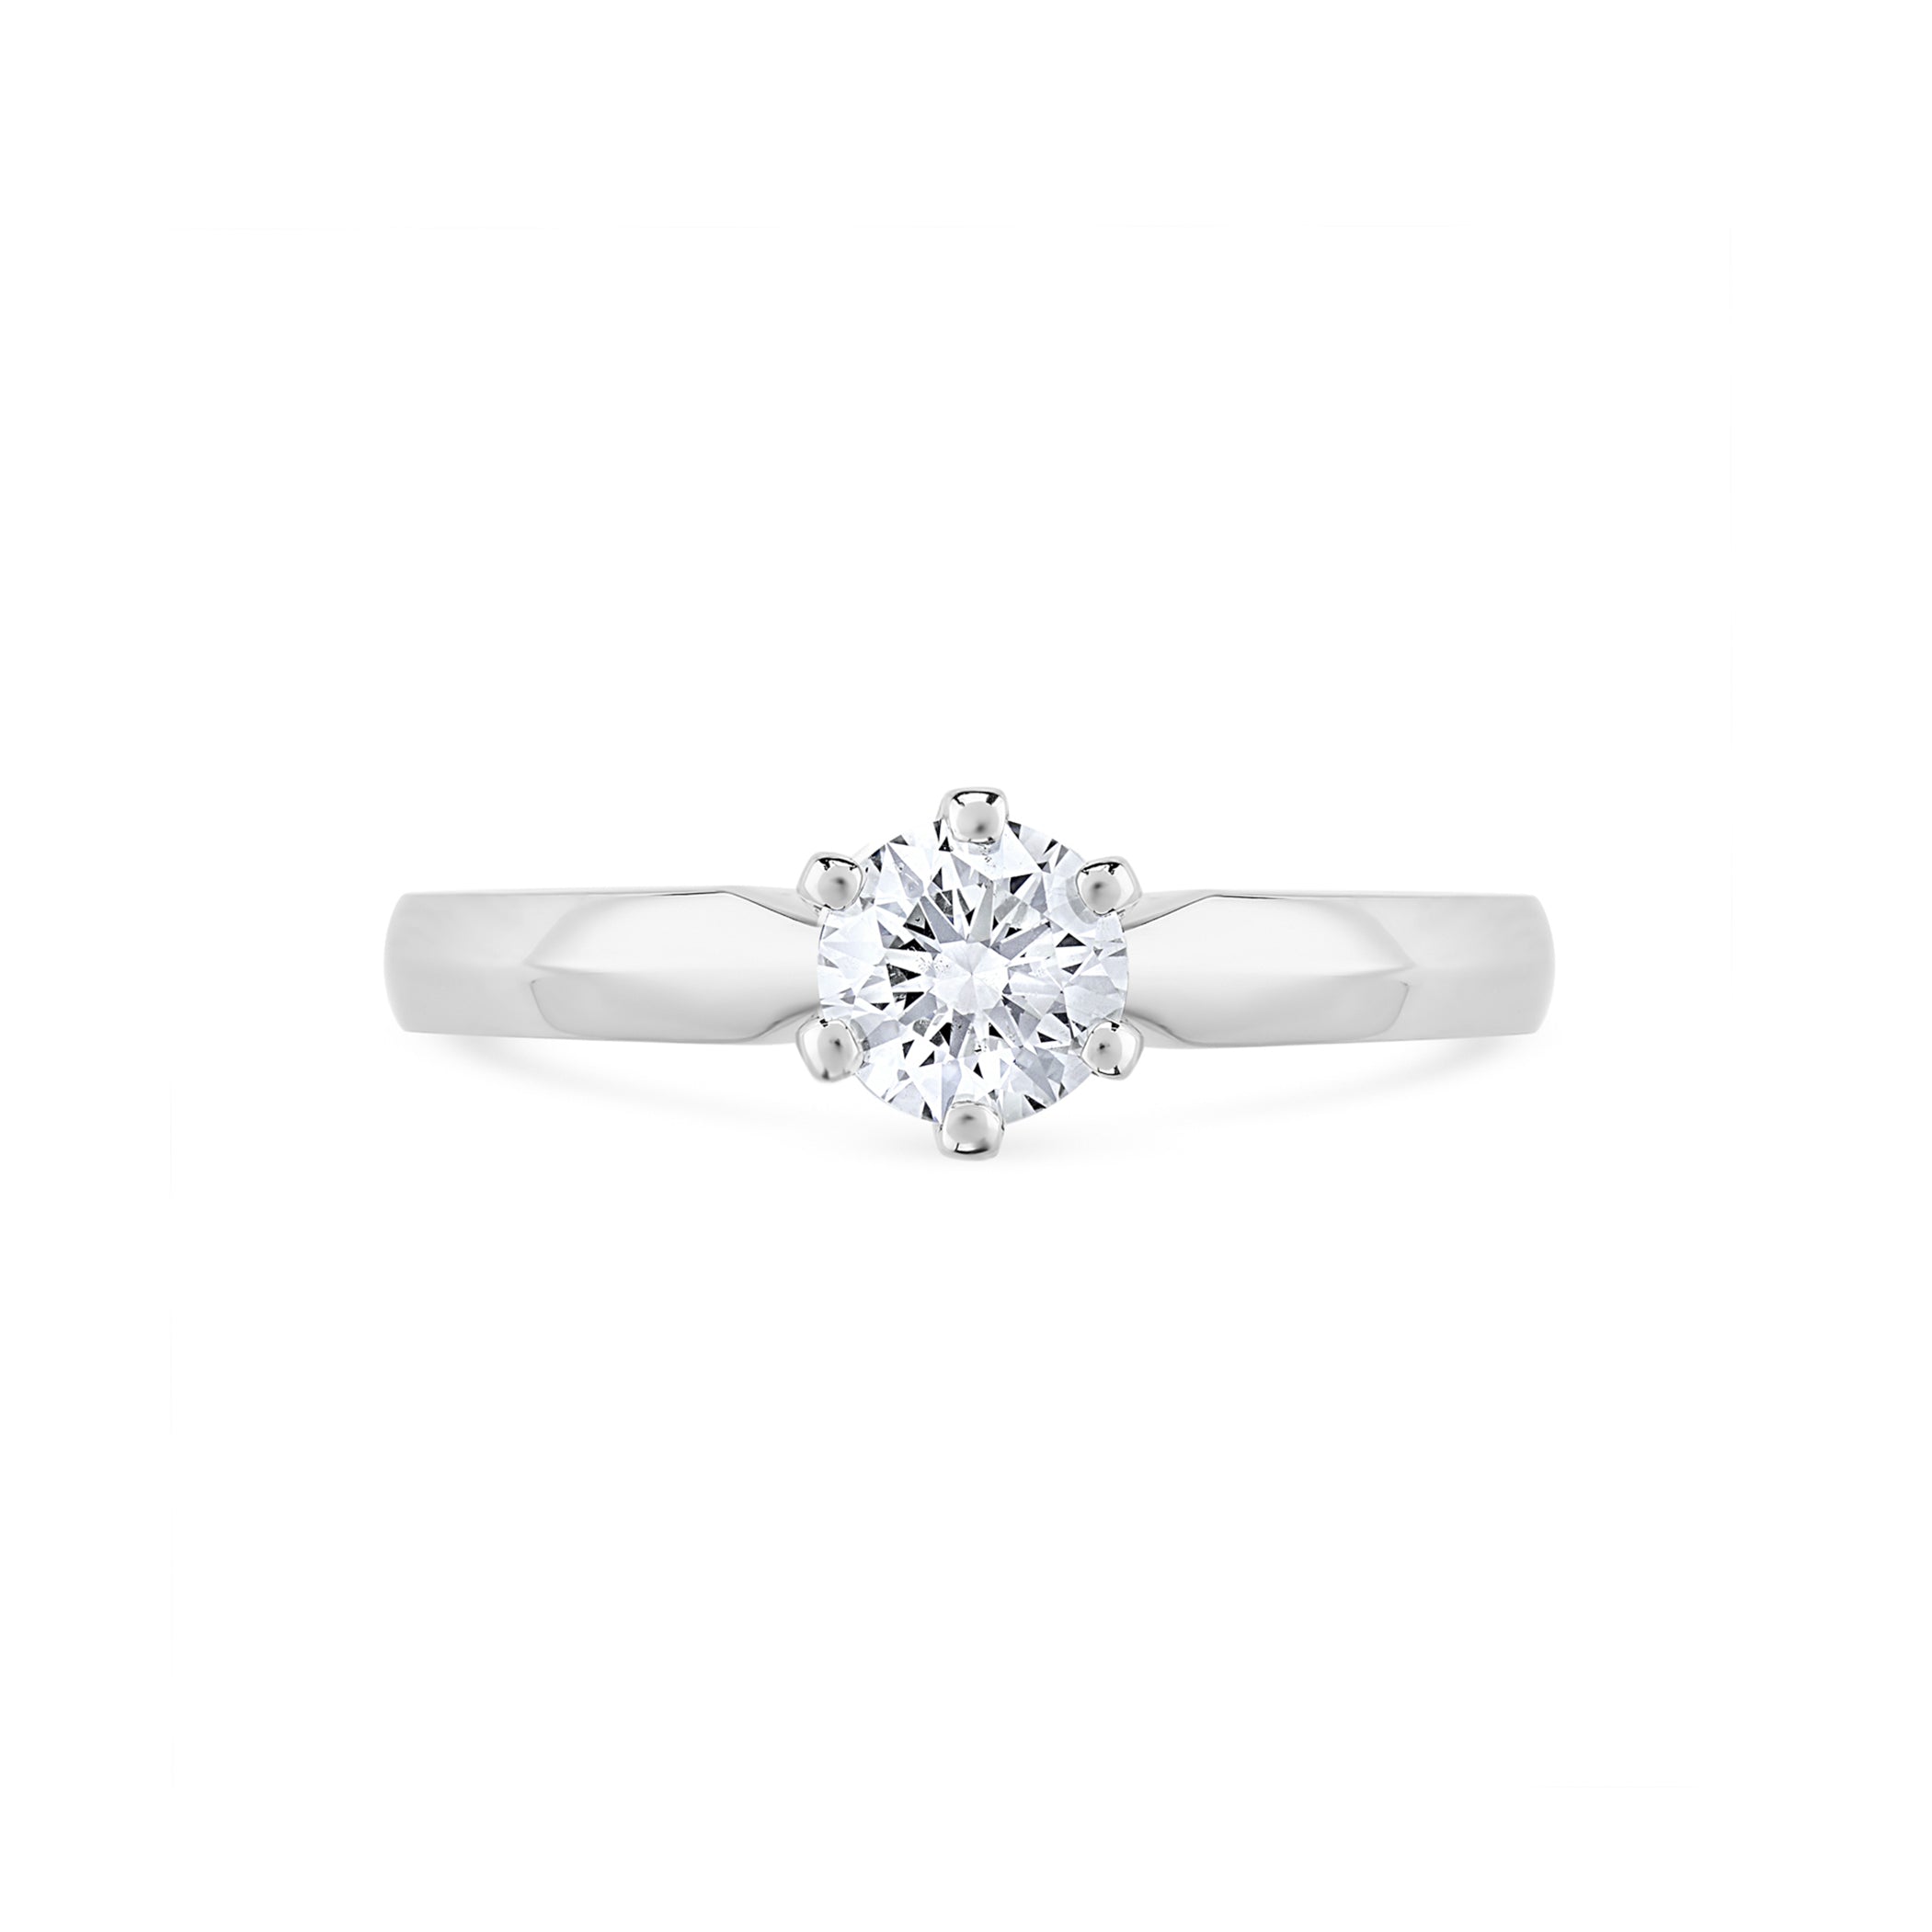 Round Brilliant Diamond Six Claw Solitaire Engagement Ring